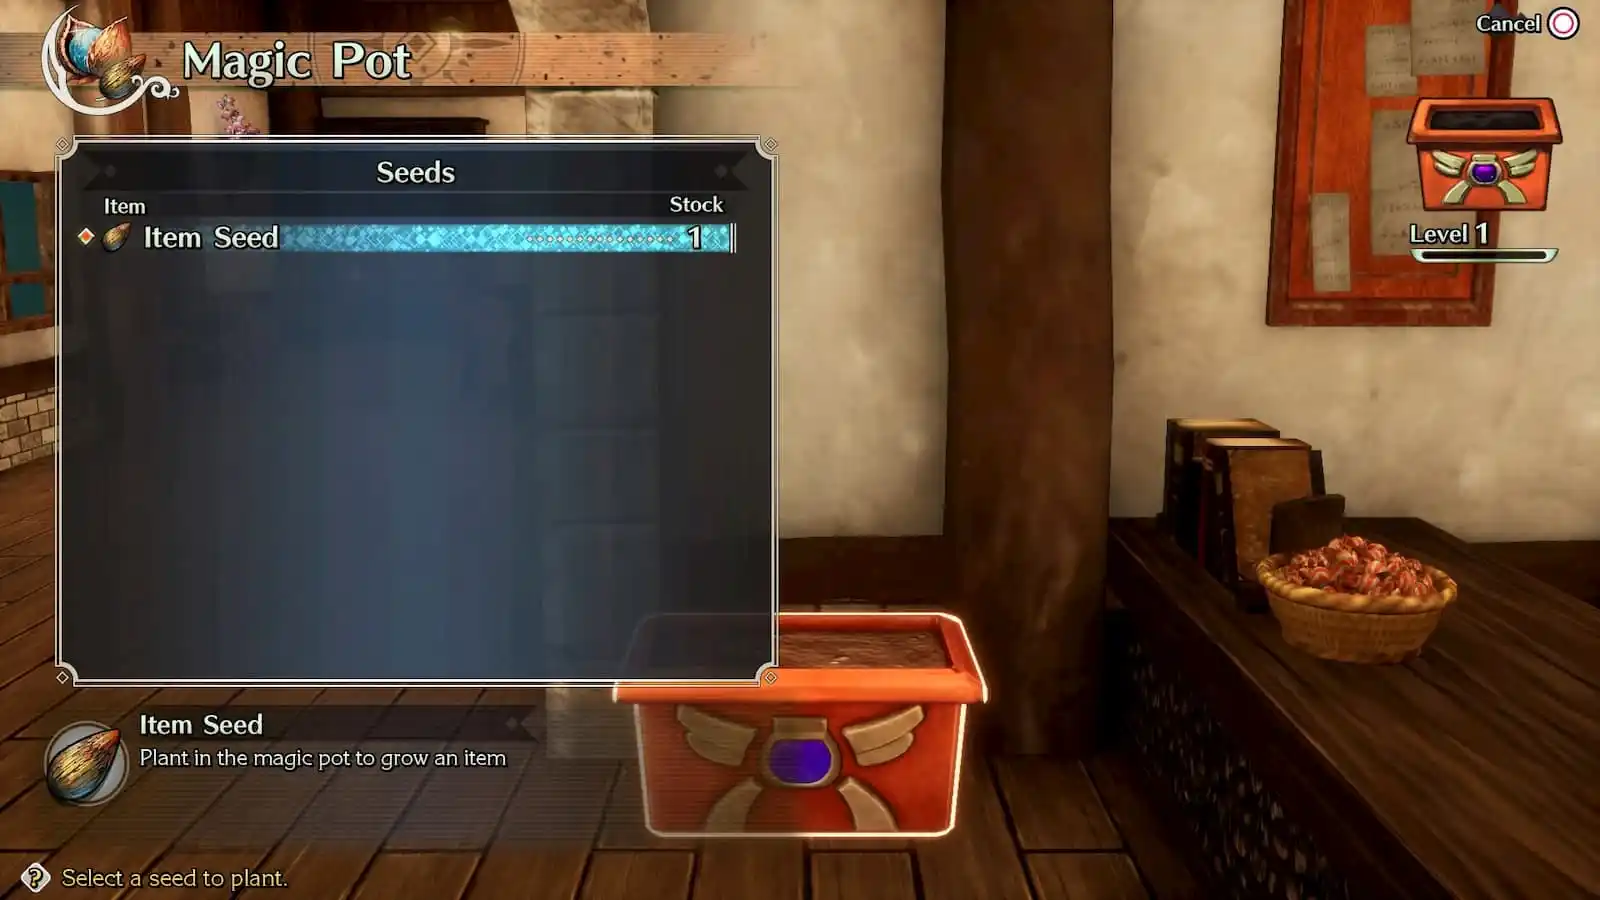  How to find and use Item Seeds in Trials of Mana 